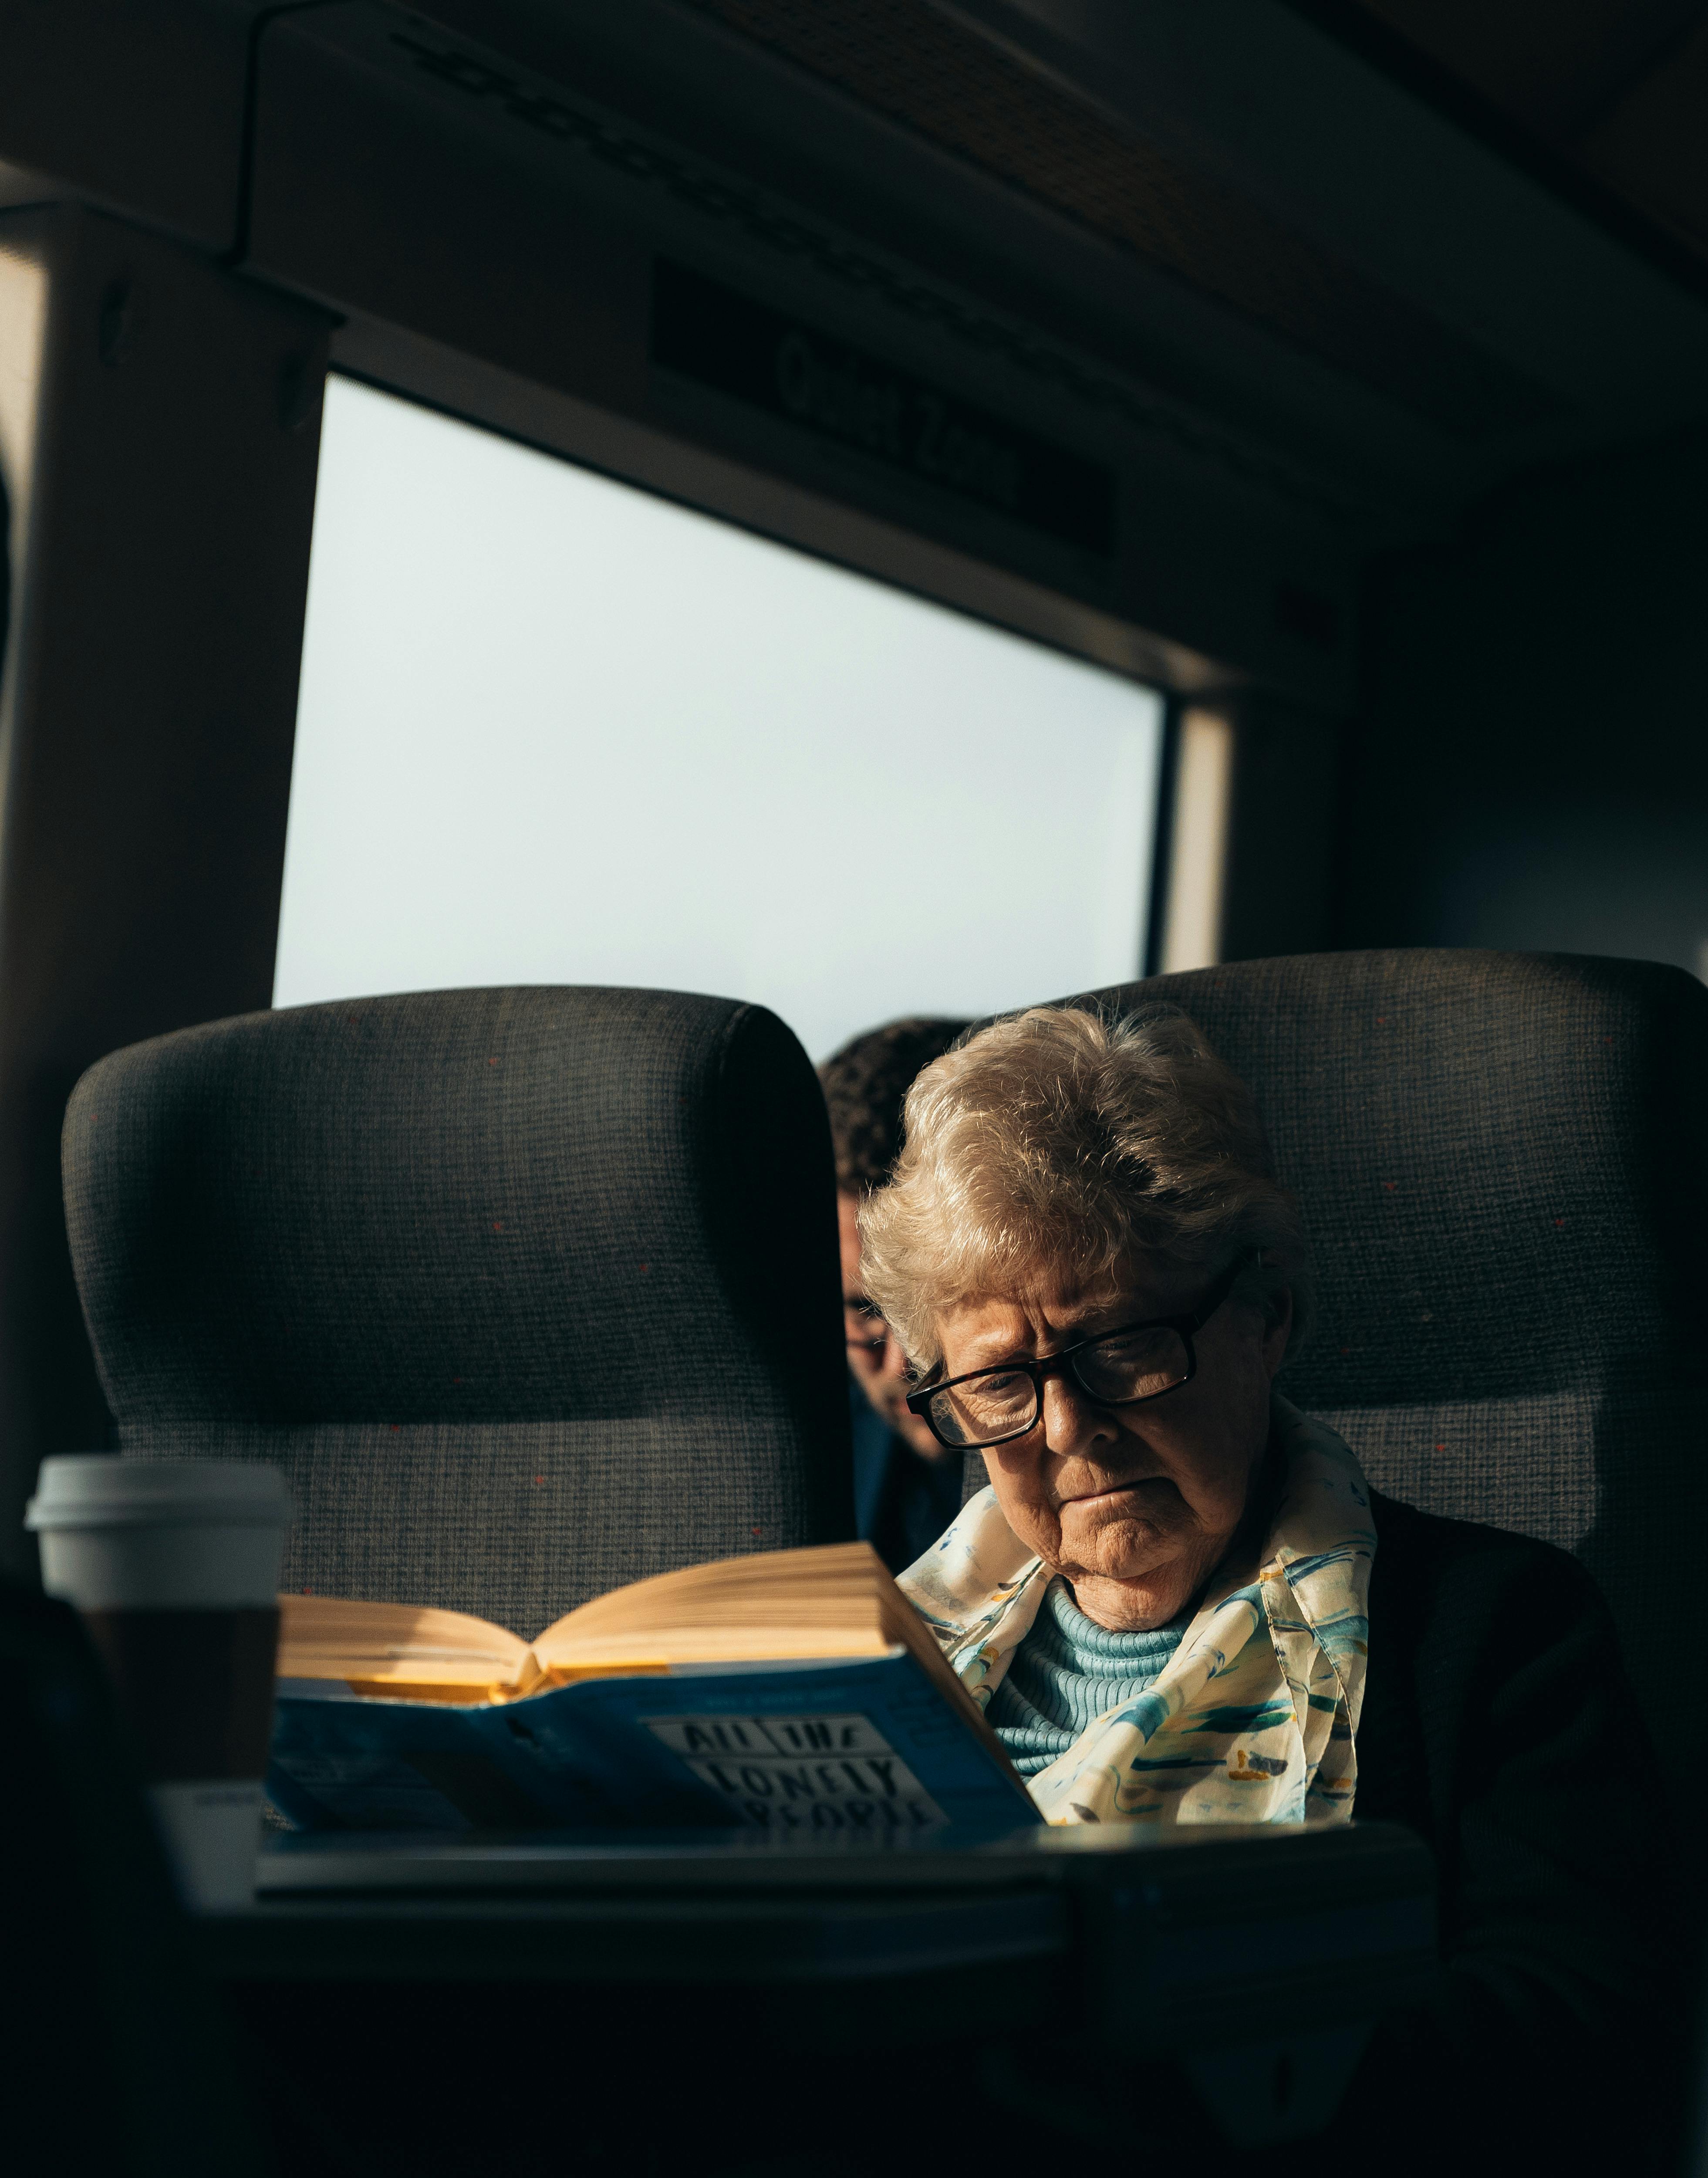 An elderly woman reading a book while traveling by train | Source: Pexels